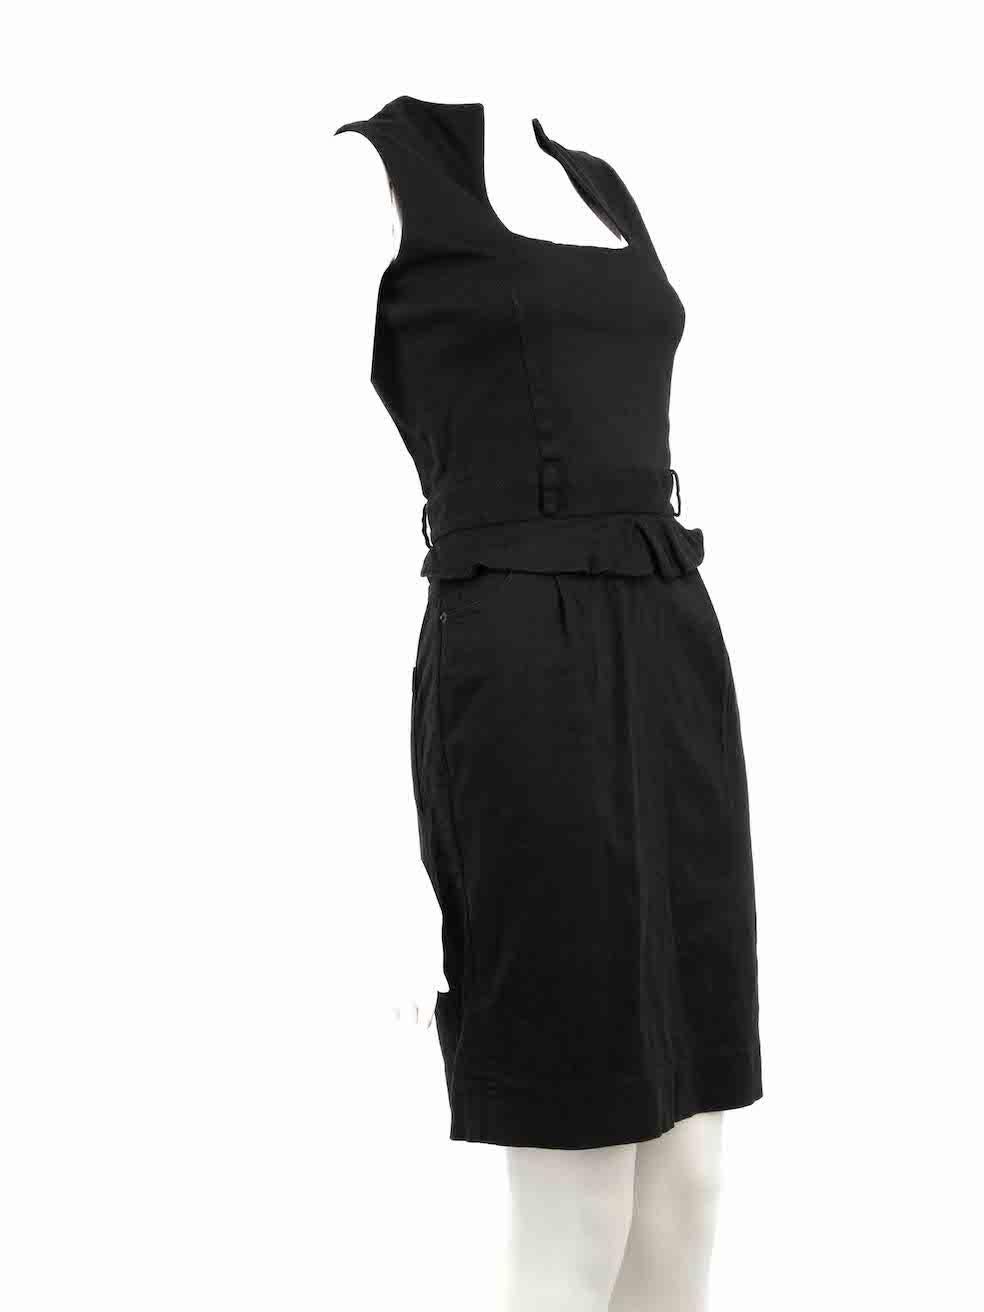 CONDITION is Very good. Hardly any visible wear to dress is evident on this used Preen By Thornton Bregazzi designer resale item. This item has a musty smell due to poor storage.
 
 
 
 Details
 
 
 Black
 
 Cotton
 
 Mini dress
 
 Square neckline
